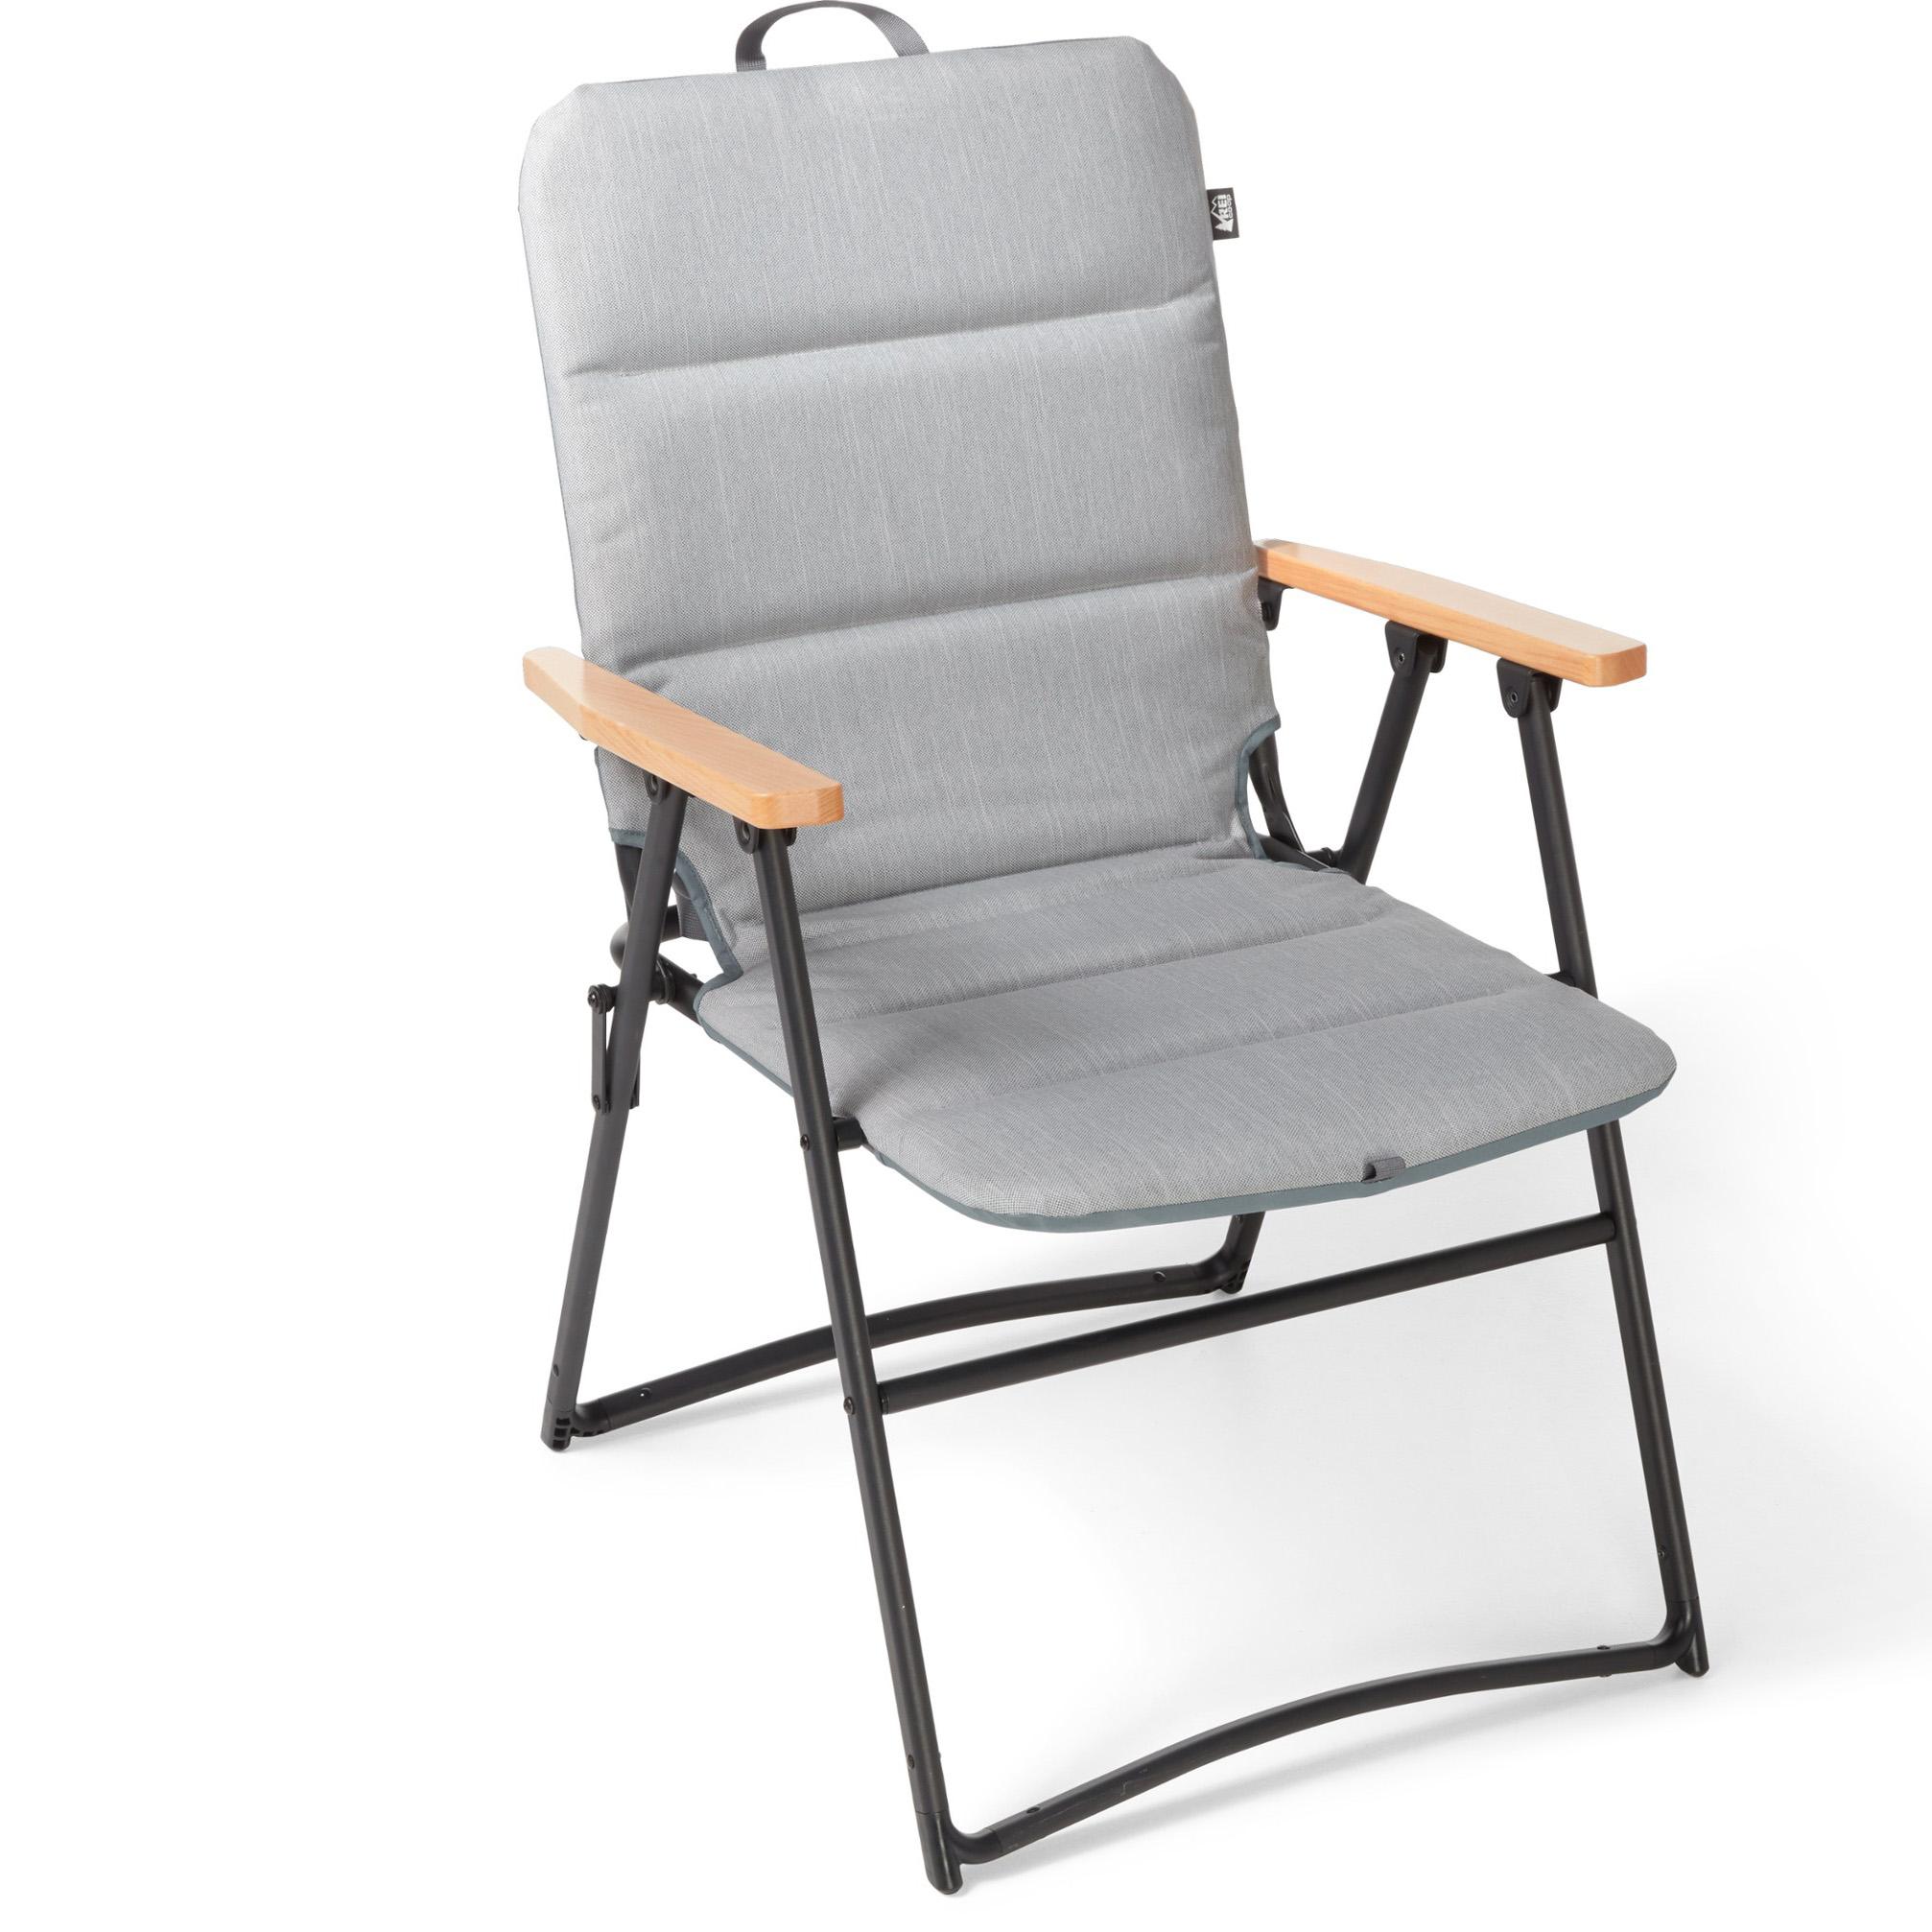 REI Co-op Outward Padded Lawn Chair for $44.93